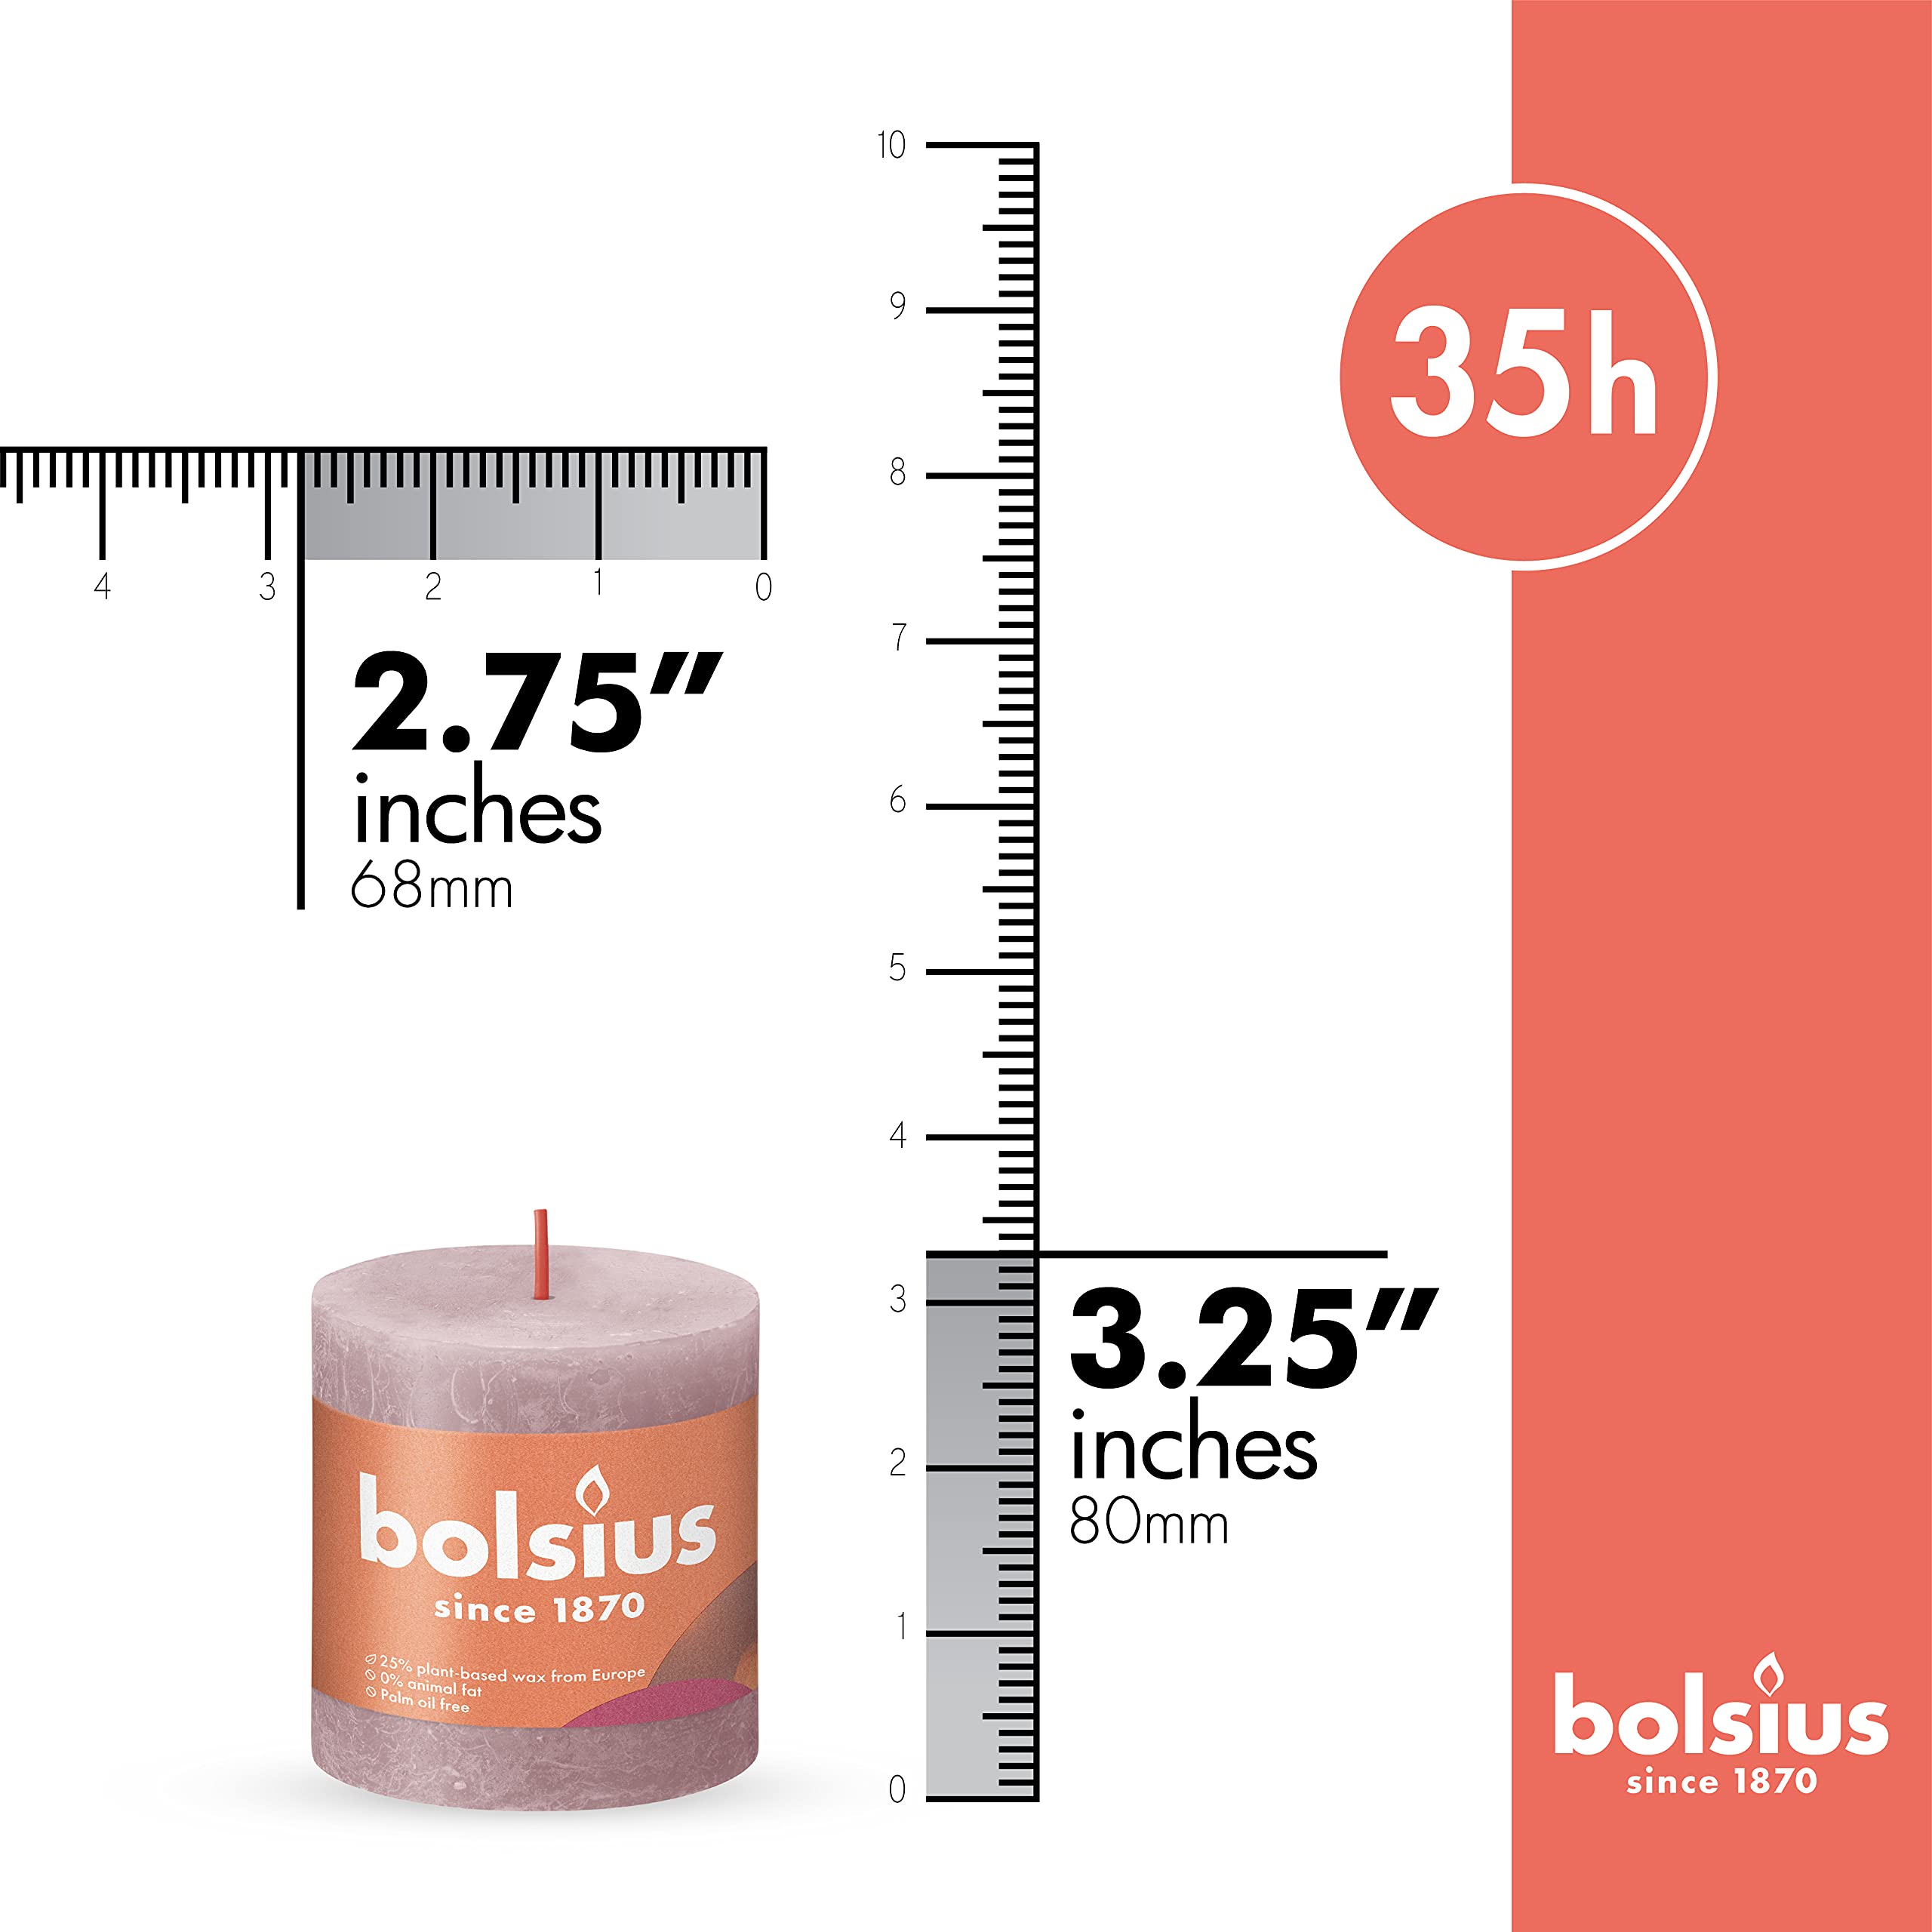 BOLSIUS Pillar Candles - Premium European Quality - Natural Eco-Friendly Plant-Based Wax - Unscented Dripless Smokeless 35 Hour Party and Wedding Candles  - Like New